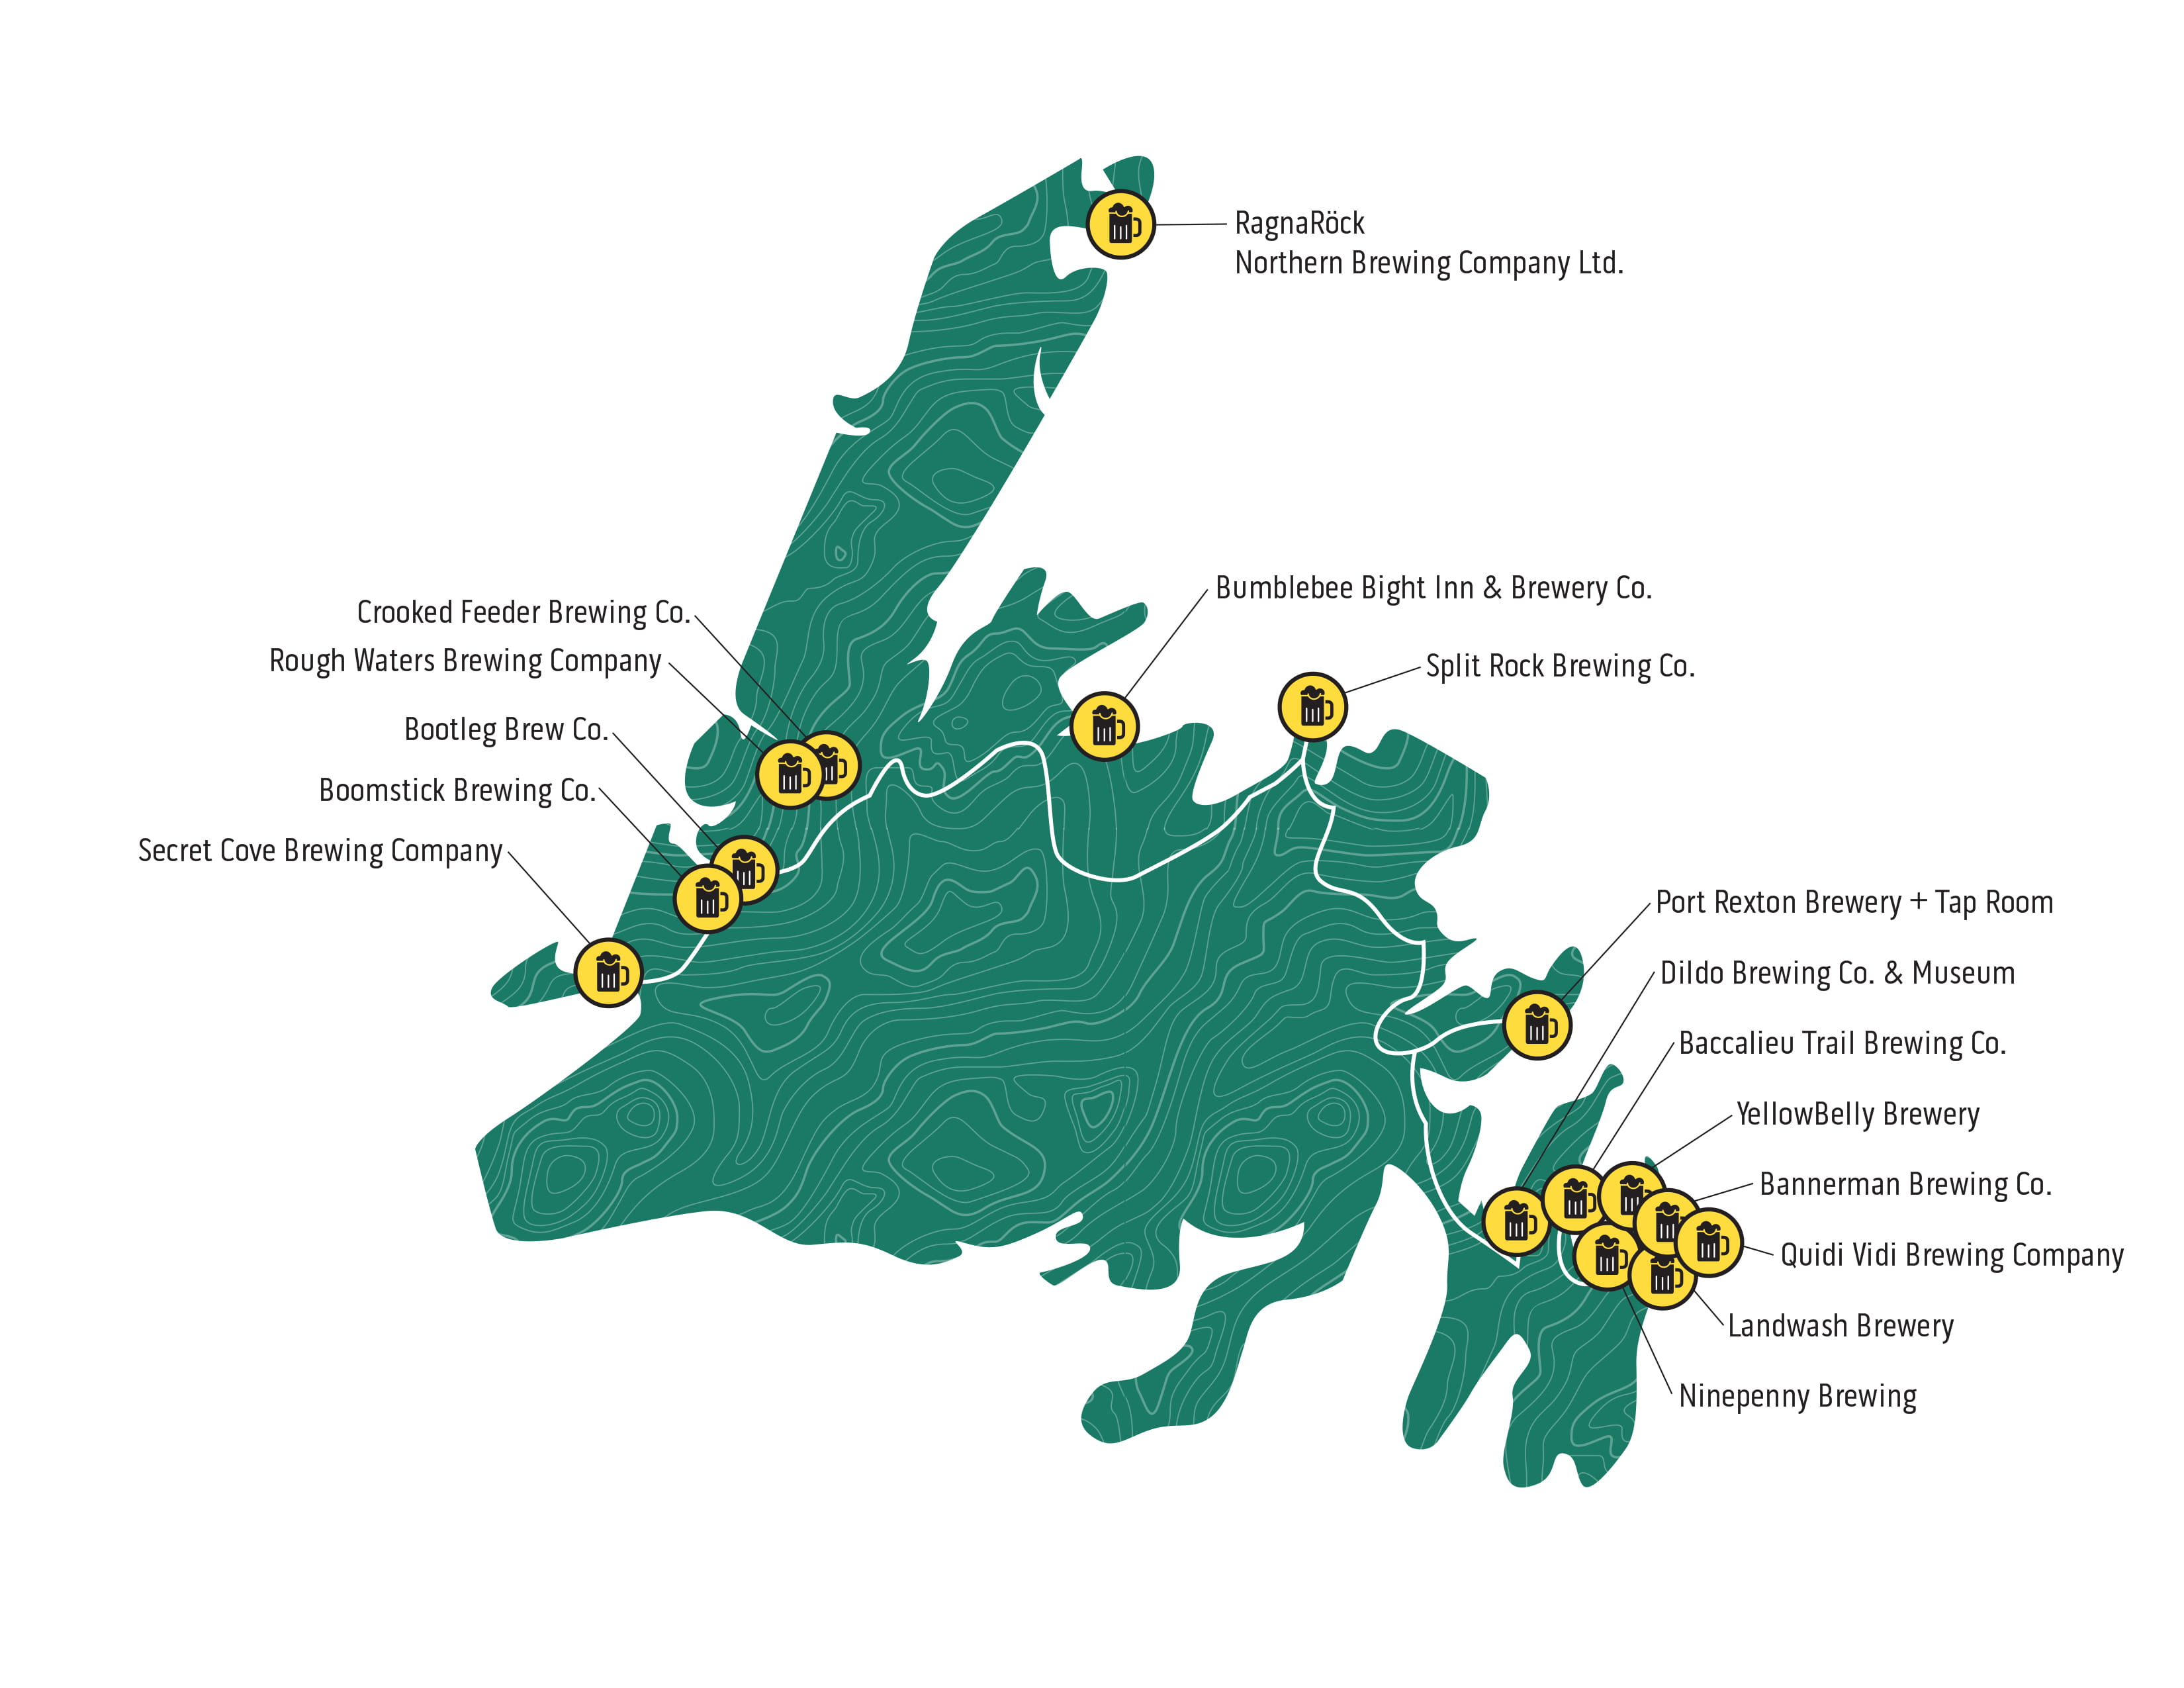 Map of craft breweries from around the island of Newfoundland